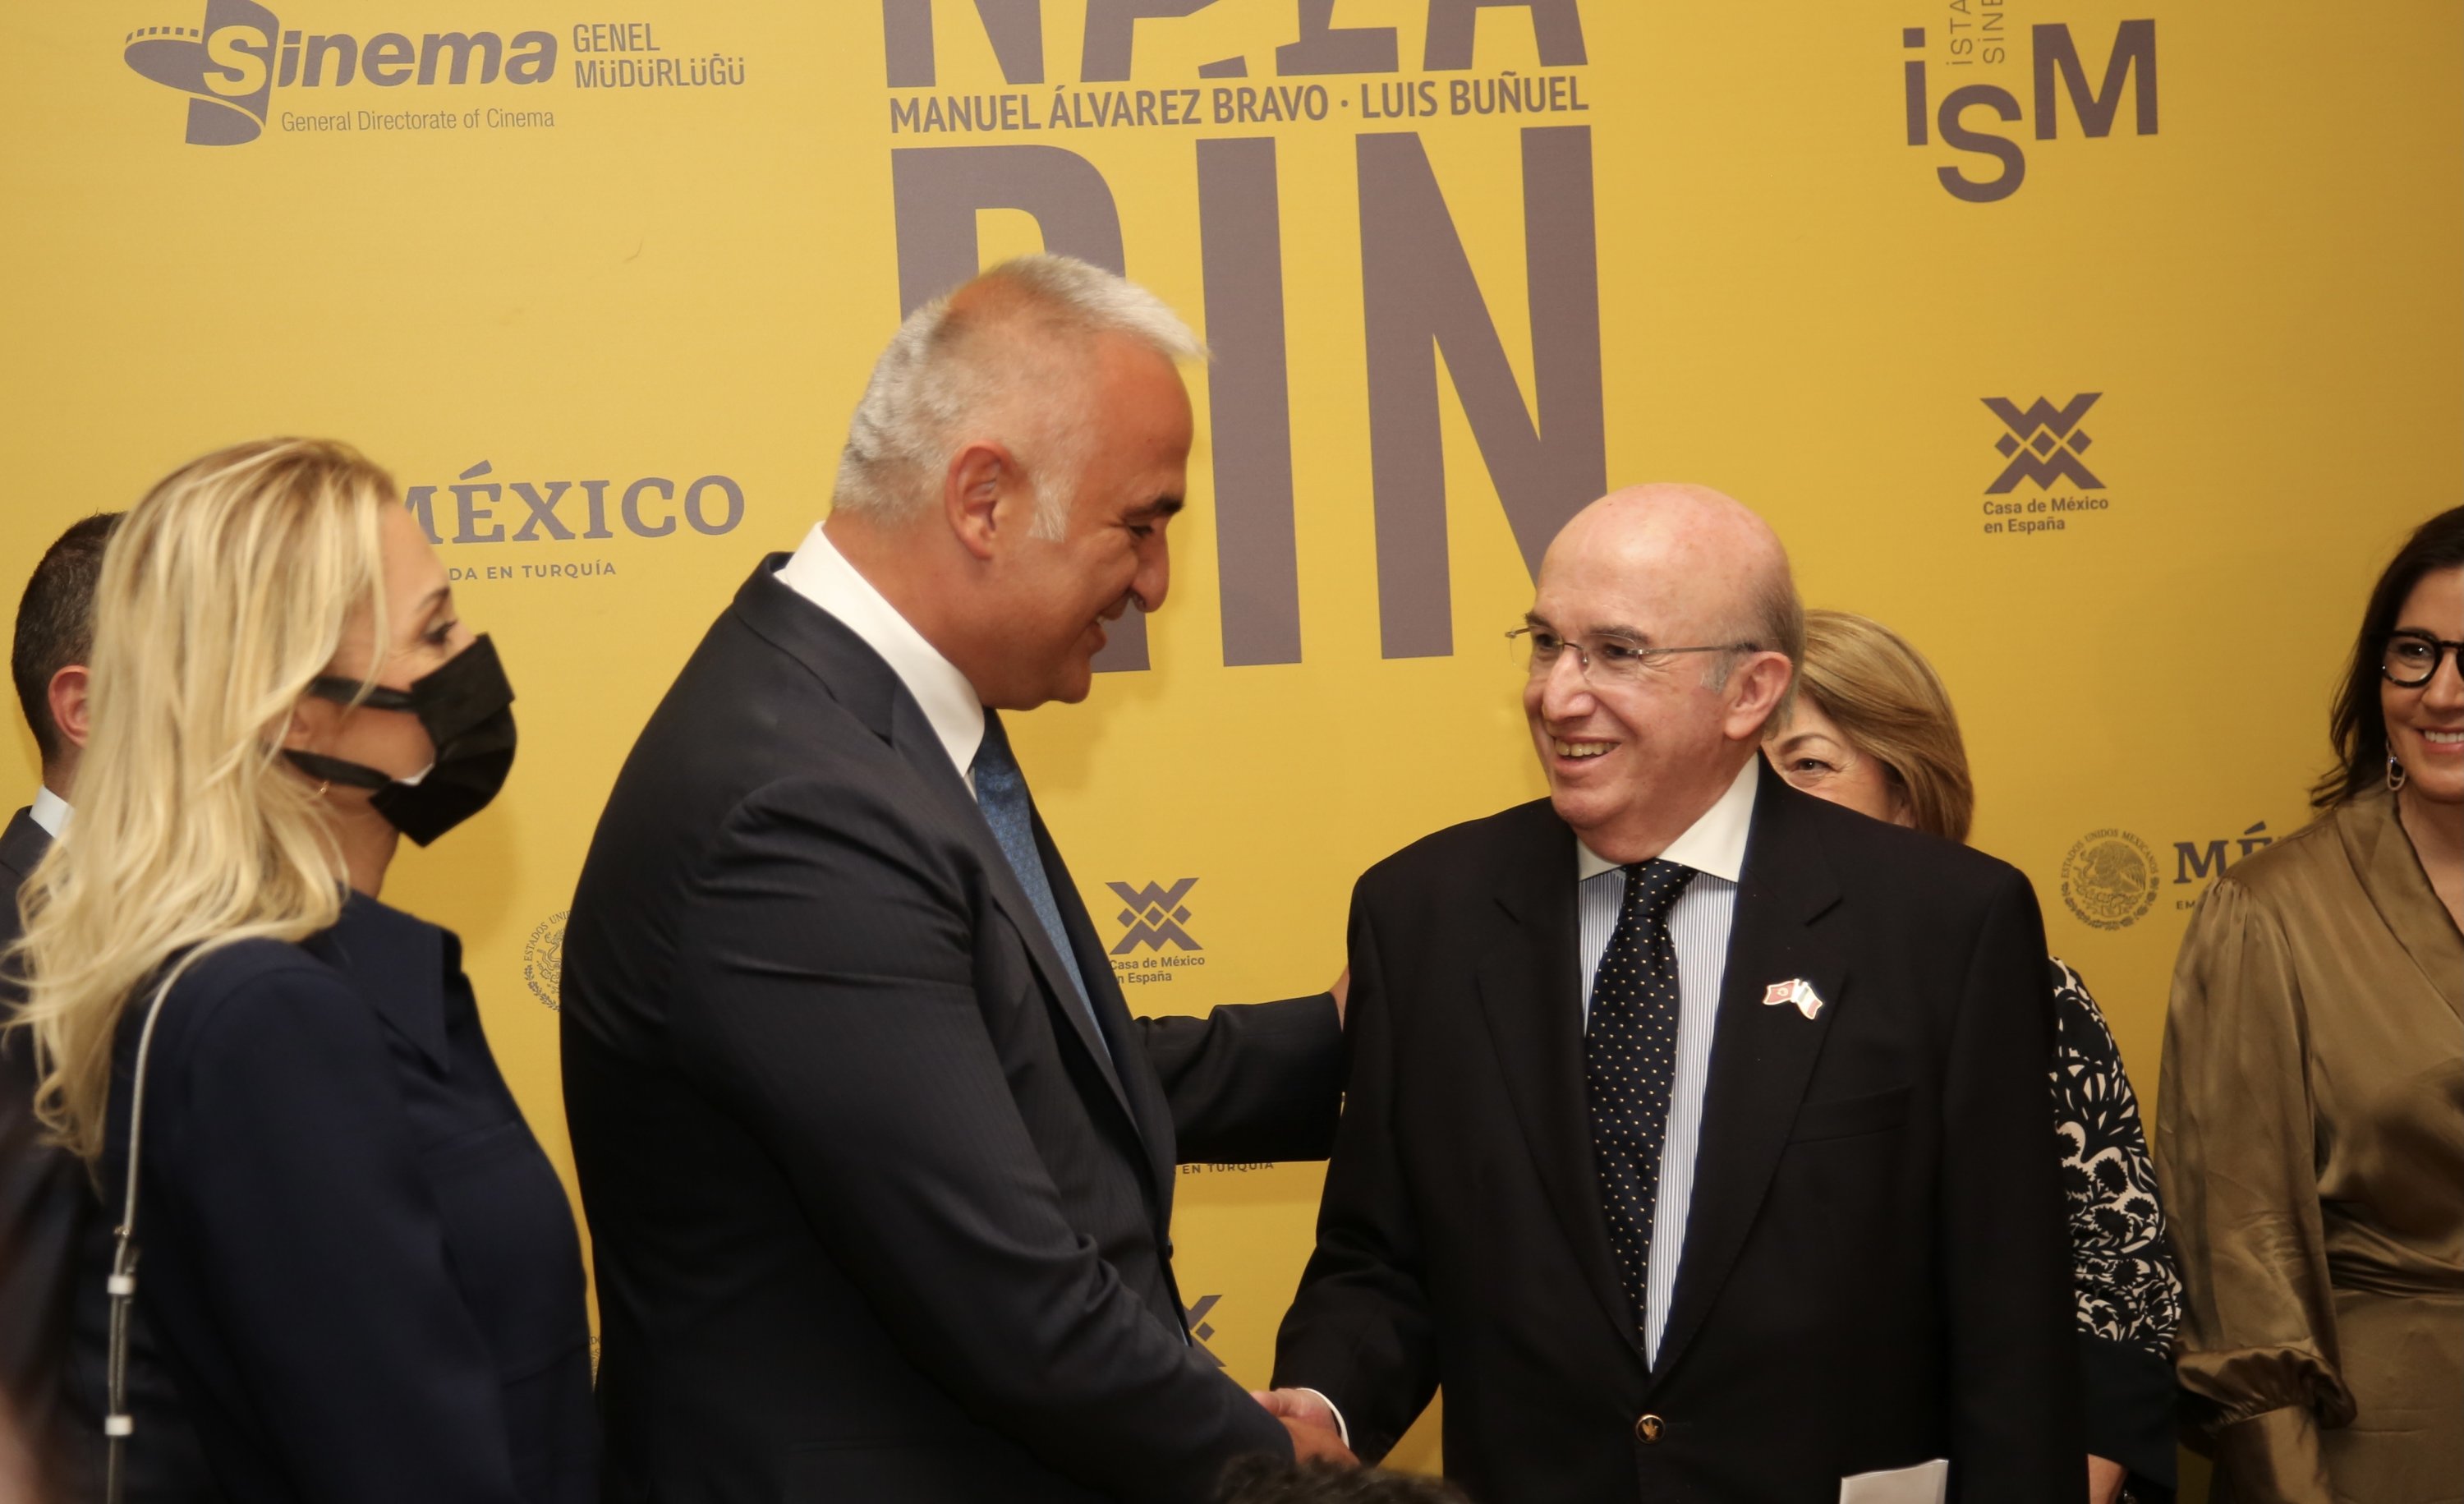 Minister of Culture and Tourism Mehmet Nuri Ersoy (L) shakes the hand of the Mexican Ambassador to Ankara Jose Luis Martinez y Hermandez at the 'Nazarin' exhibition at the Istanbul Cinema Museum, in Istanbul, Turkey, Oct. 8, 2021.